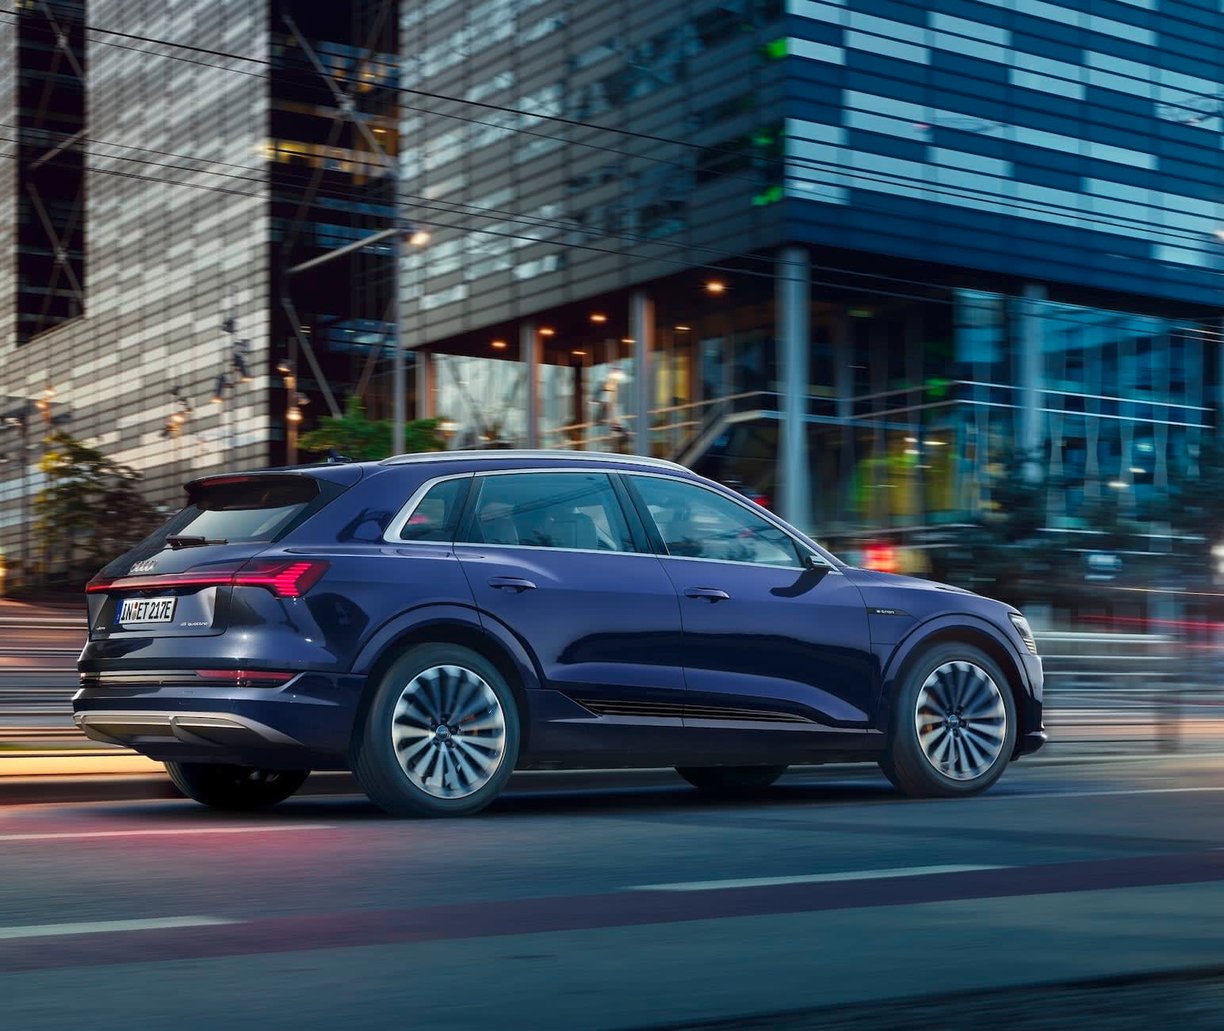 The new Audi e-tron quattro with the Clyde car subscription